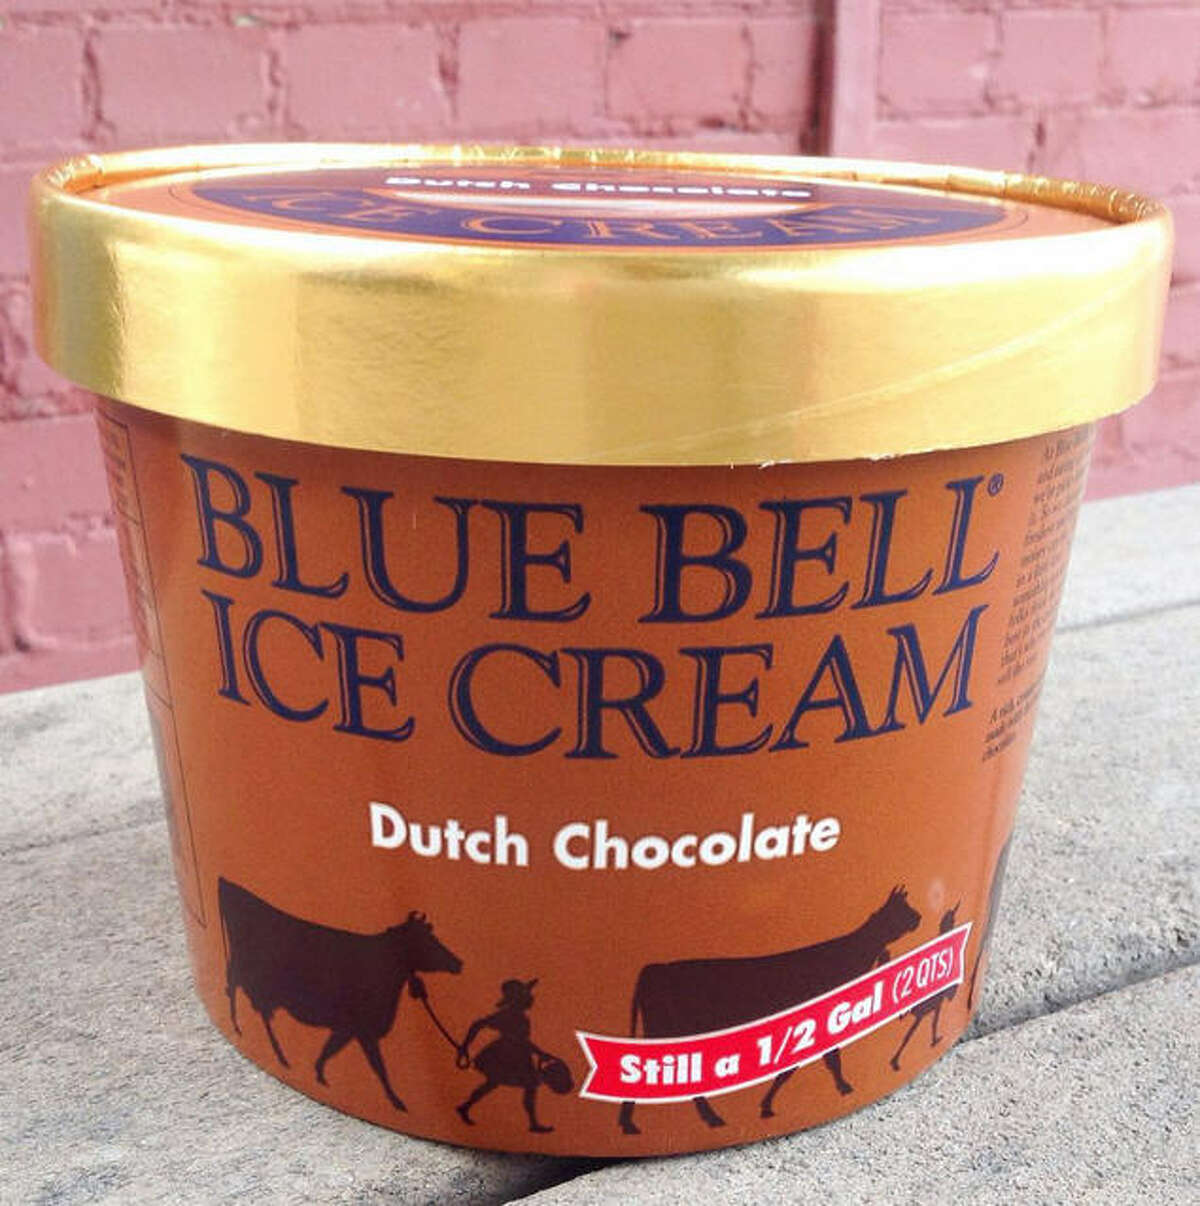 Second Flavor to Return Blue Bell announced via its Instagram page on Tuesday that Dutch Chocolate would be its second flavor to return to stores following the early 2015 listeria outbreak.